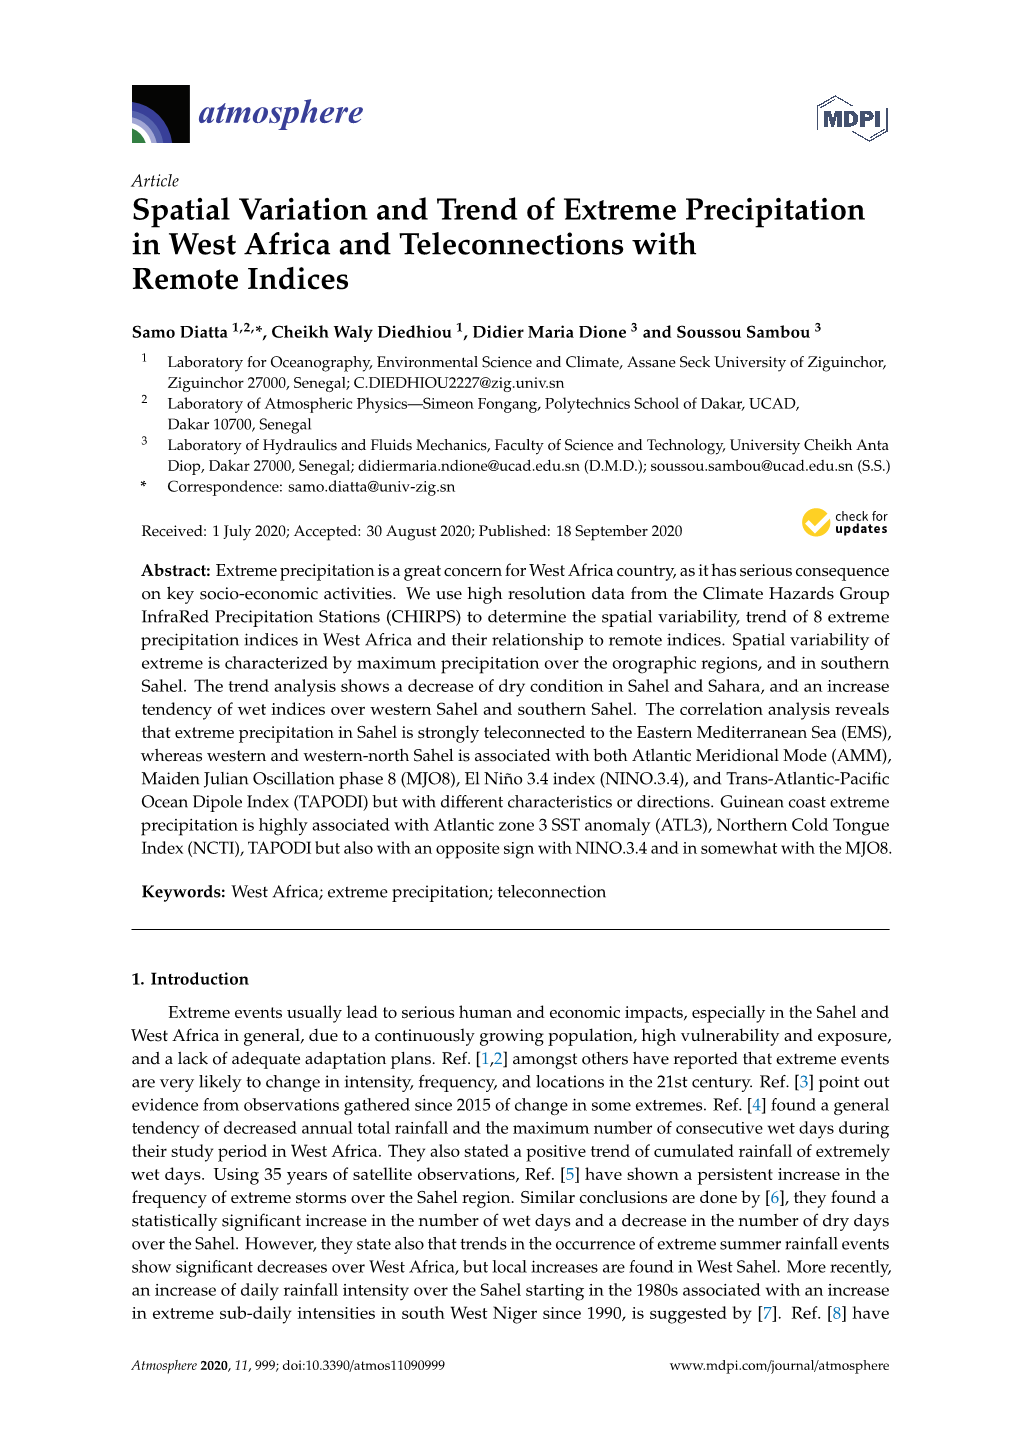 Spatial Variation and Trend of Extreme Precipitation in West Africa and Teleconnections with Remote Indices